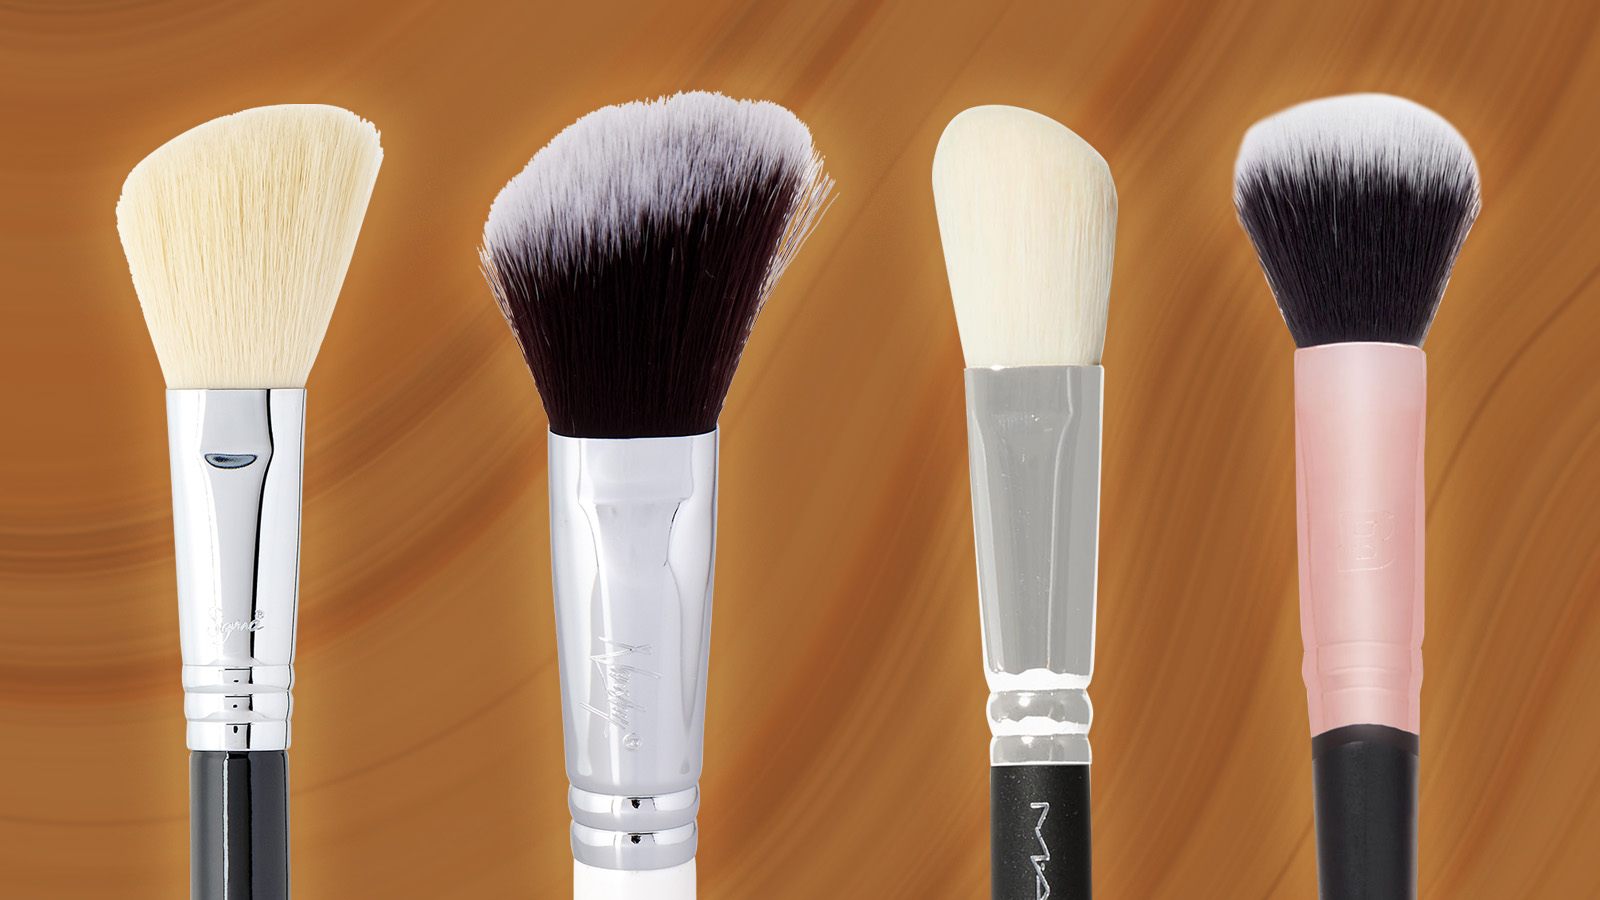 8 Best Makeup Brushes For Contouring - Beauty Bay Edited